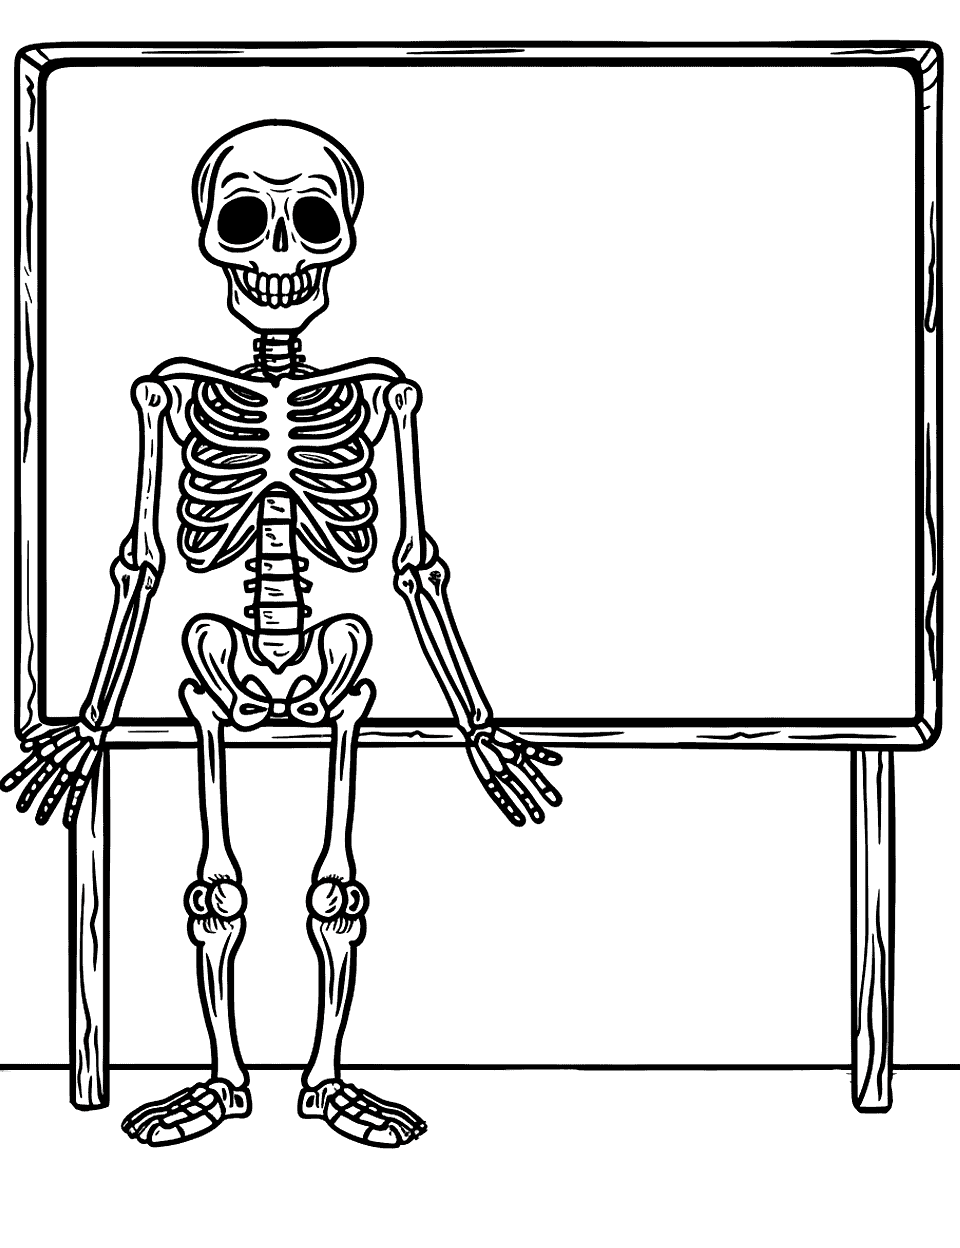 Medical Skeleton in a Classroom Coloring Page - A medical skeleton standing beside a chalkboard in an educational setting.